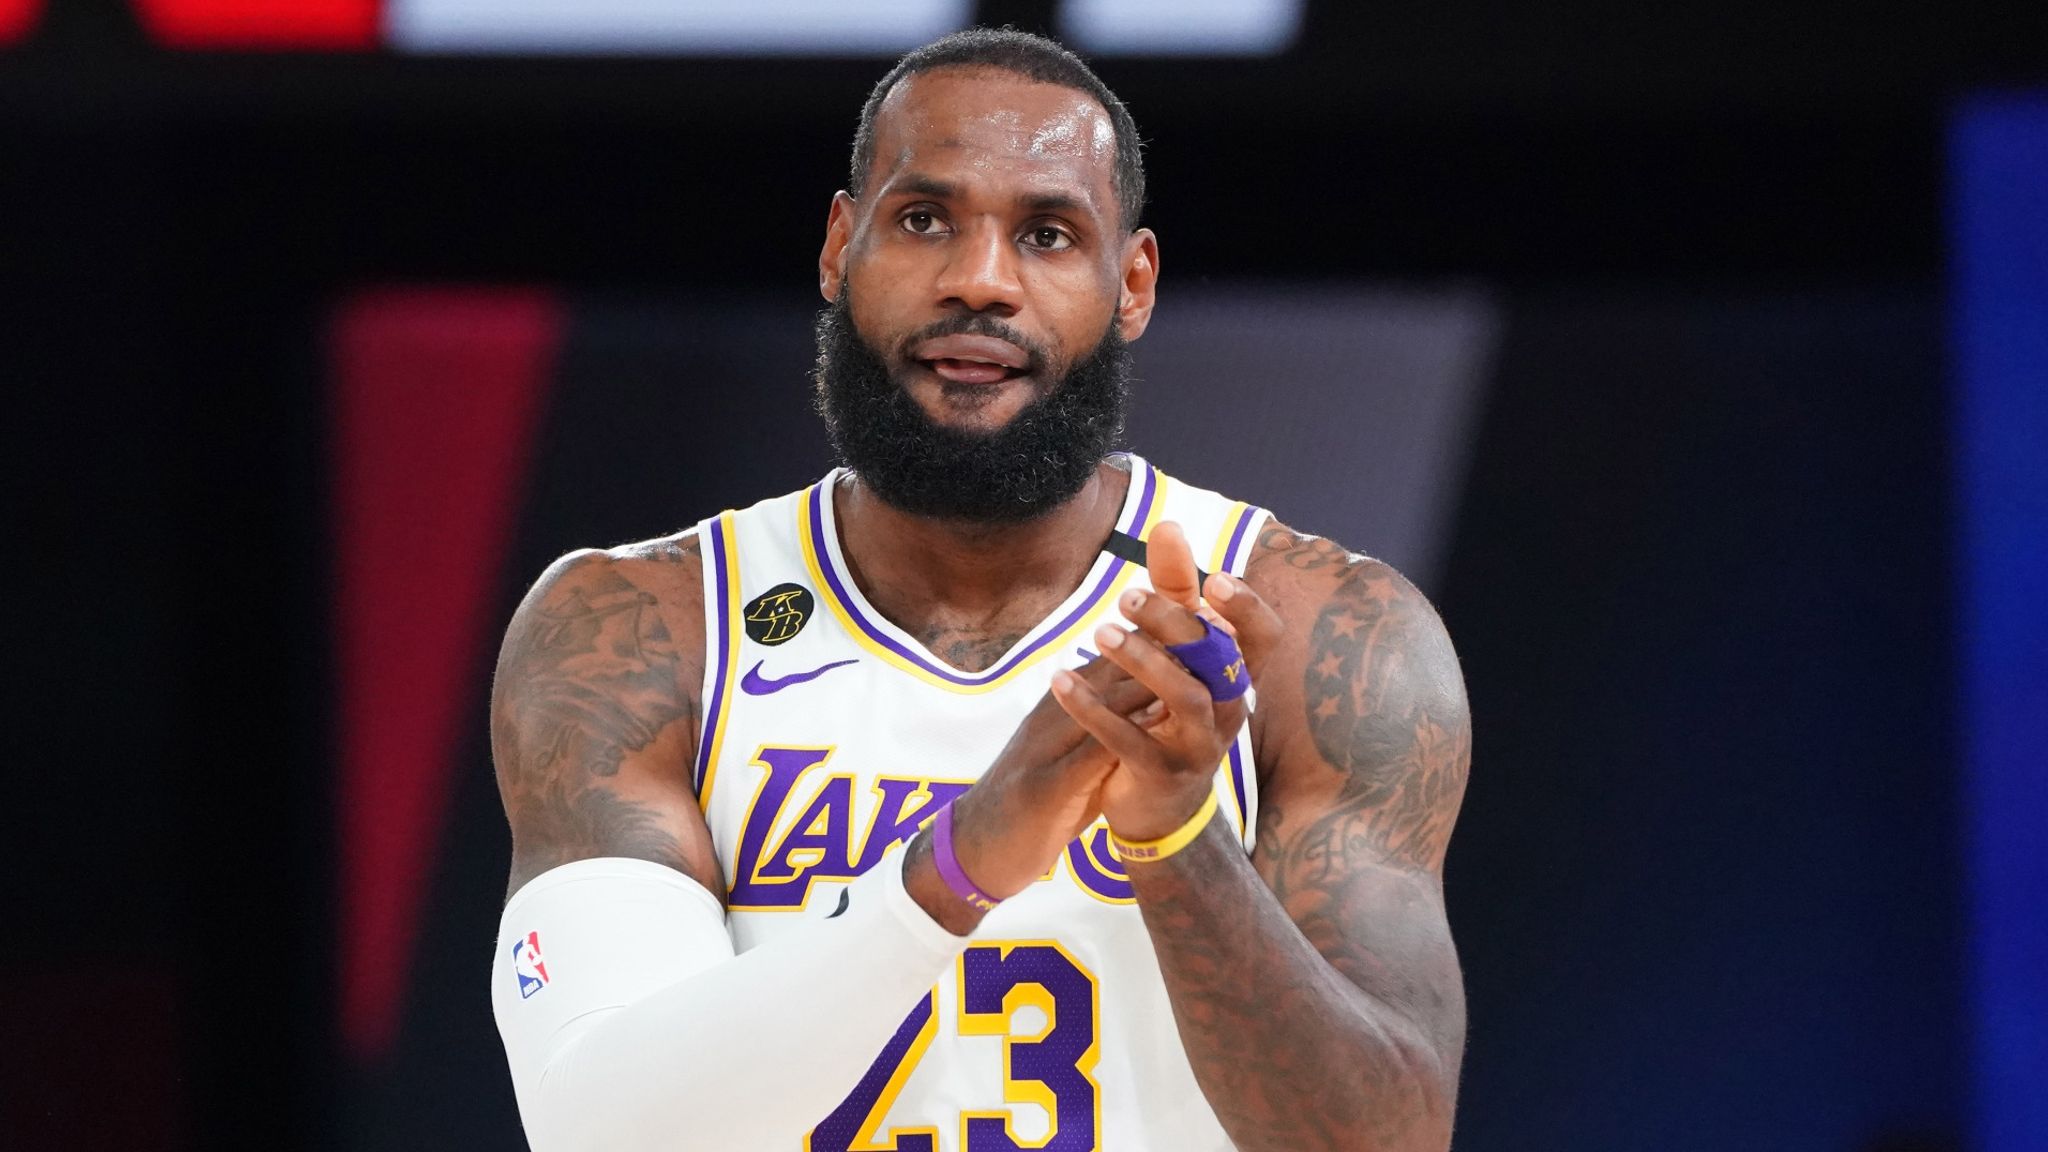 LeBron James sets NBA playoff record in Lakers' Game 3 win over Rockets |  NBA News | Sky Sports